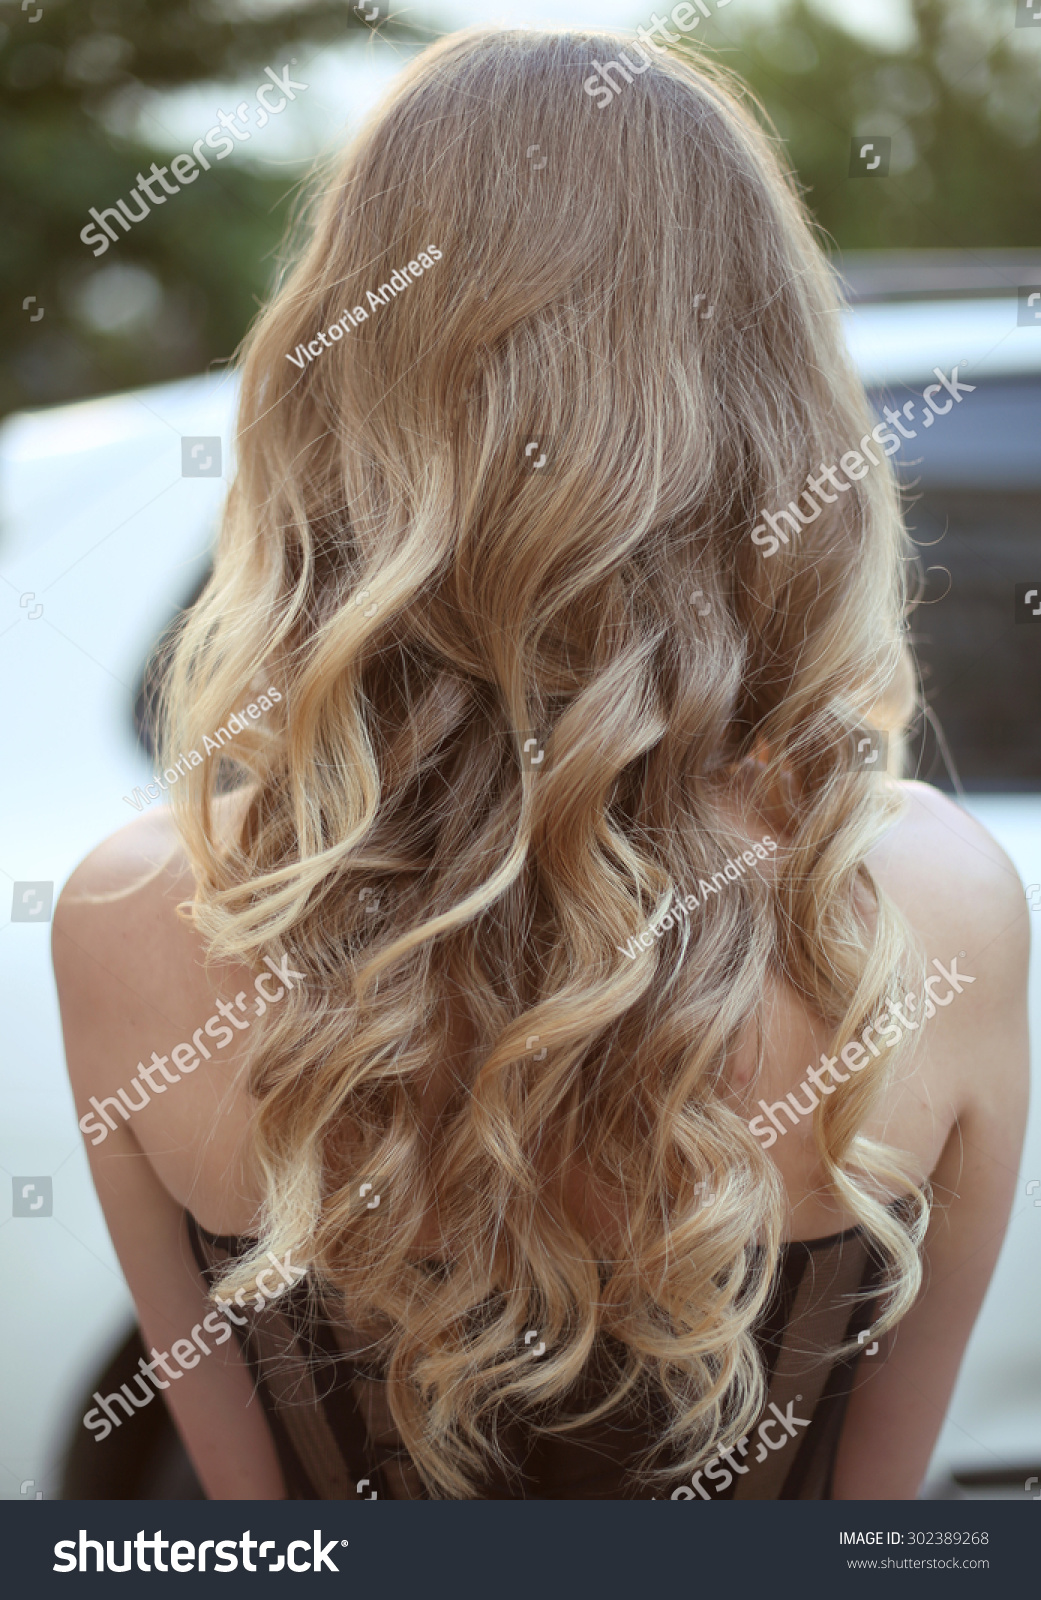 Long Curly Hairstyles Back View